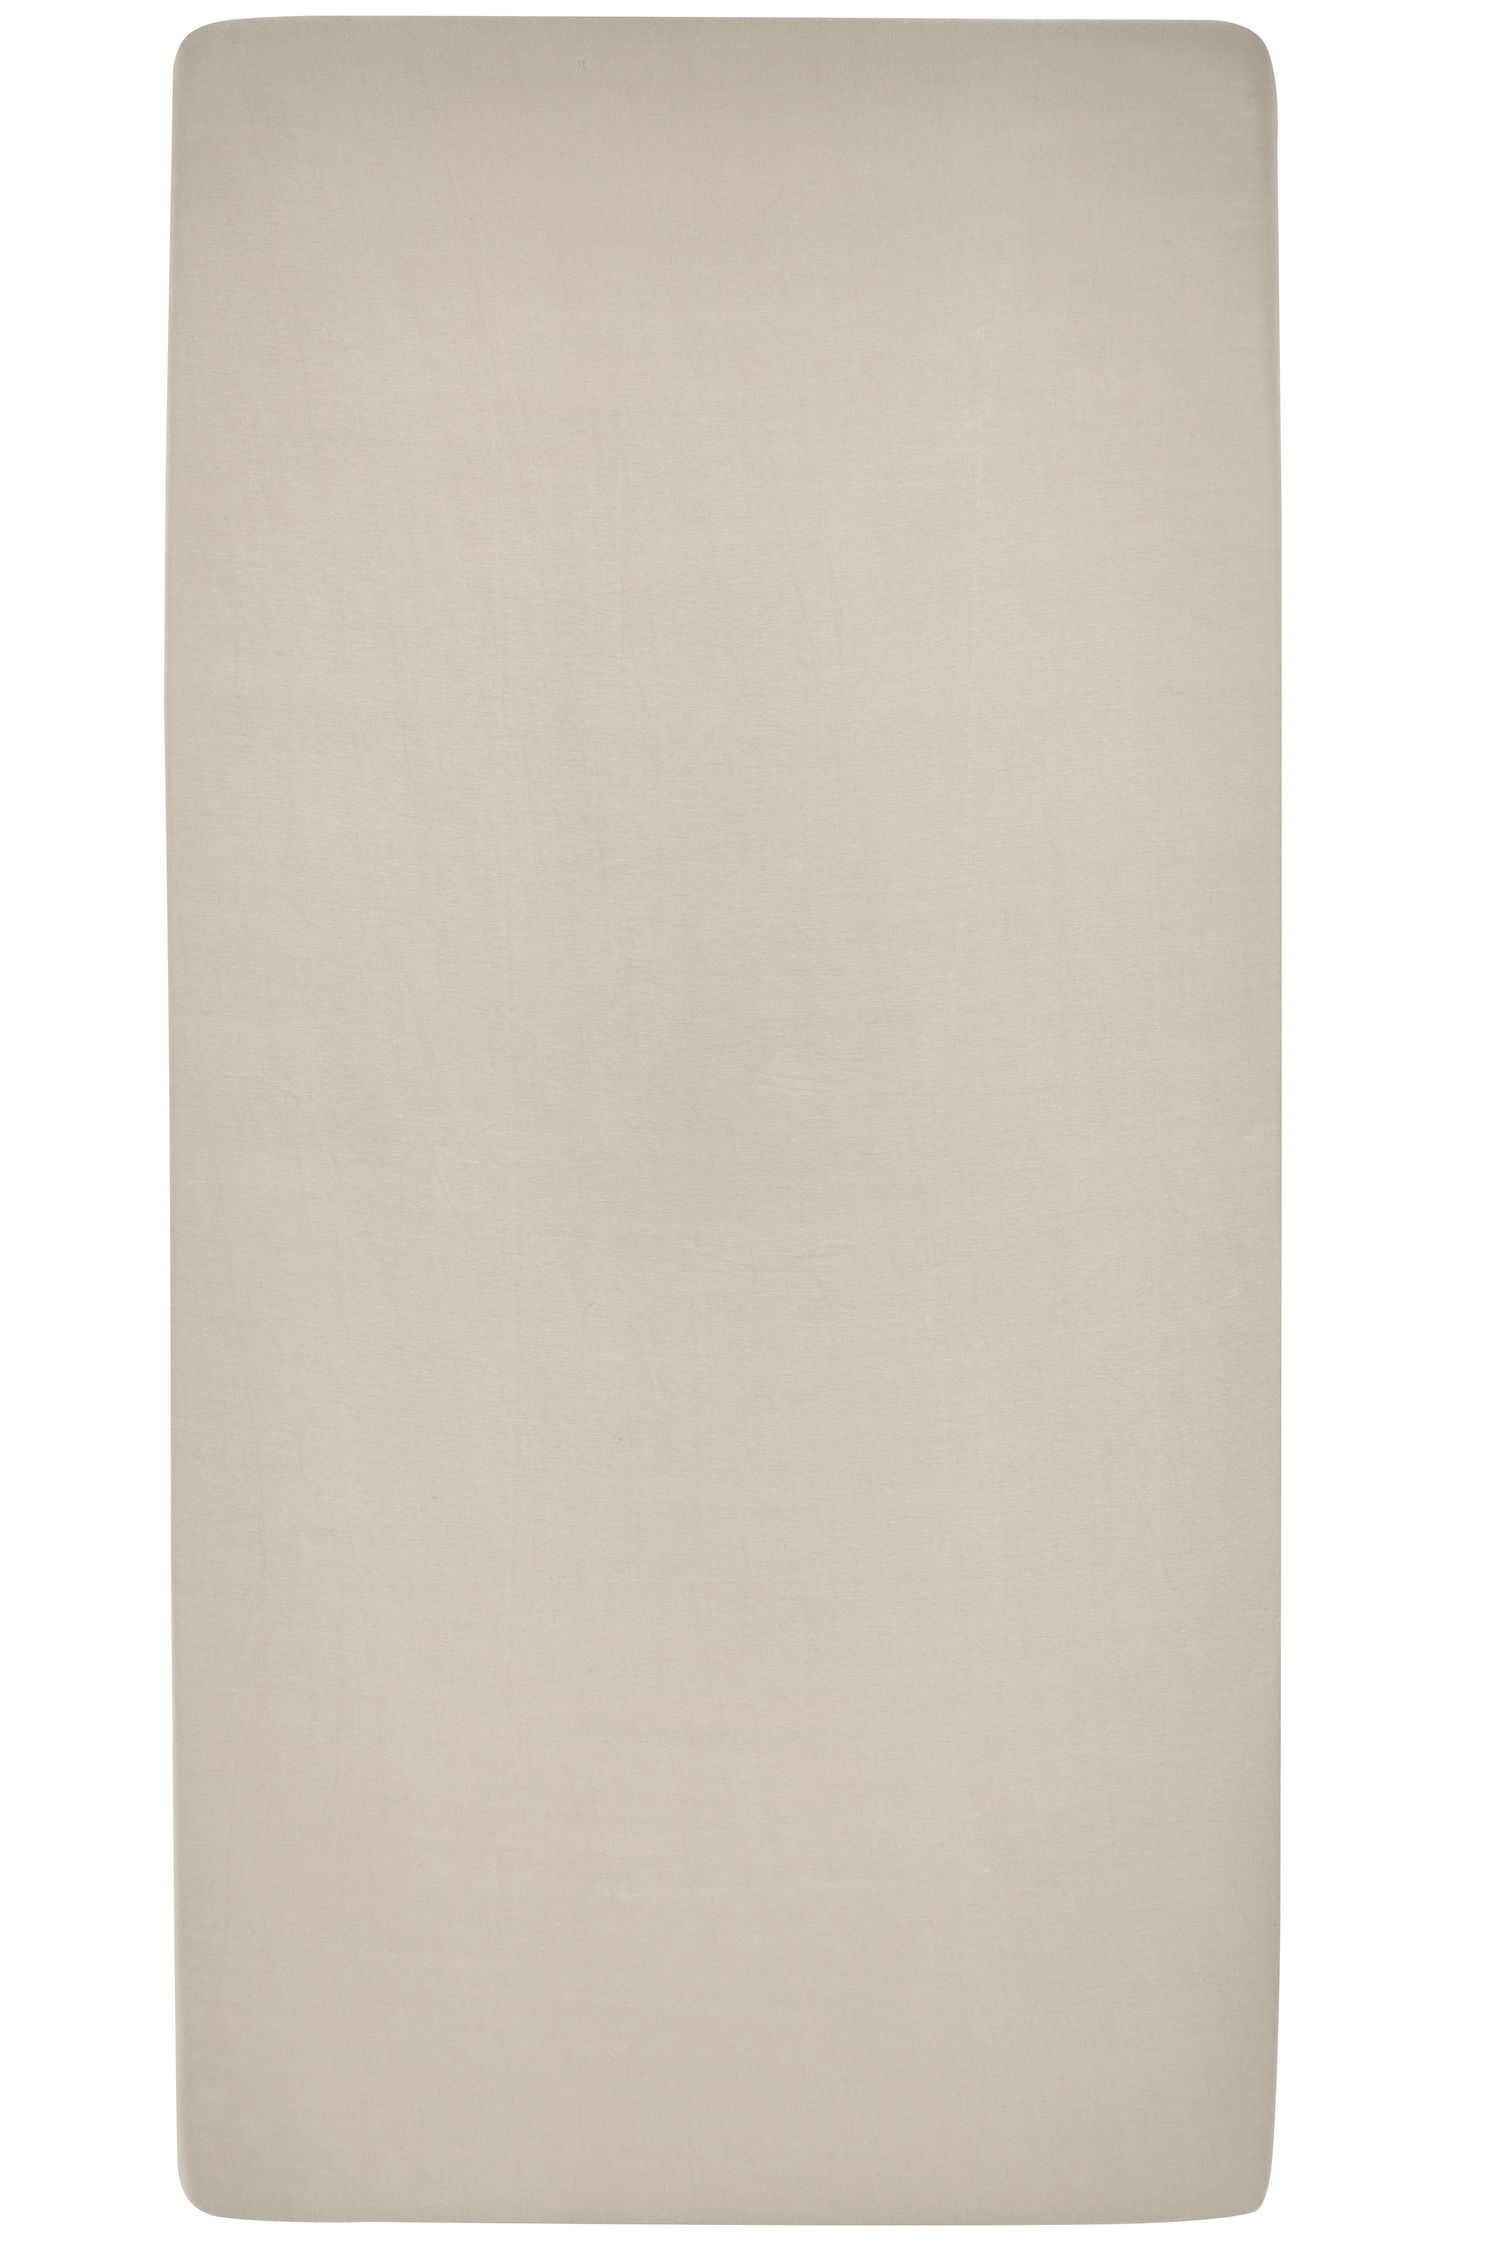 Fitted sheet 1-Pers. Uni - sand - 90x210/220cm